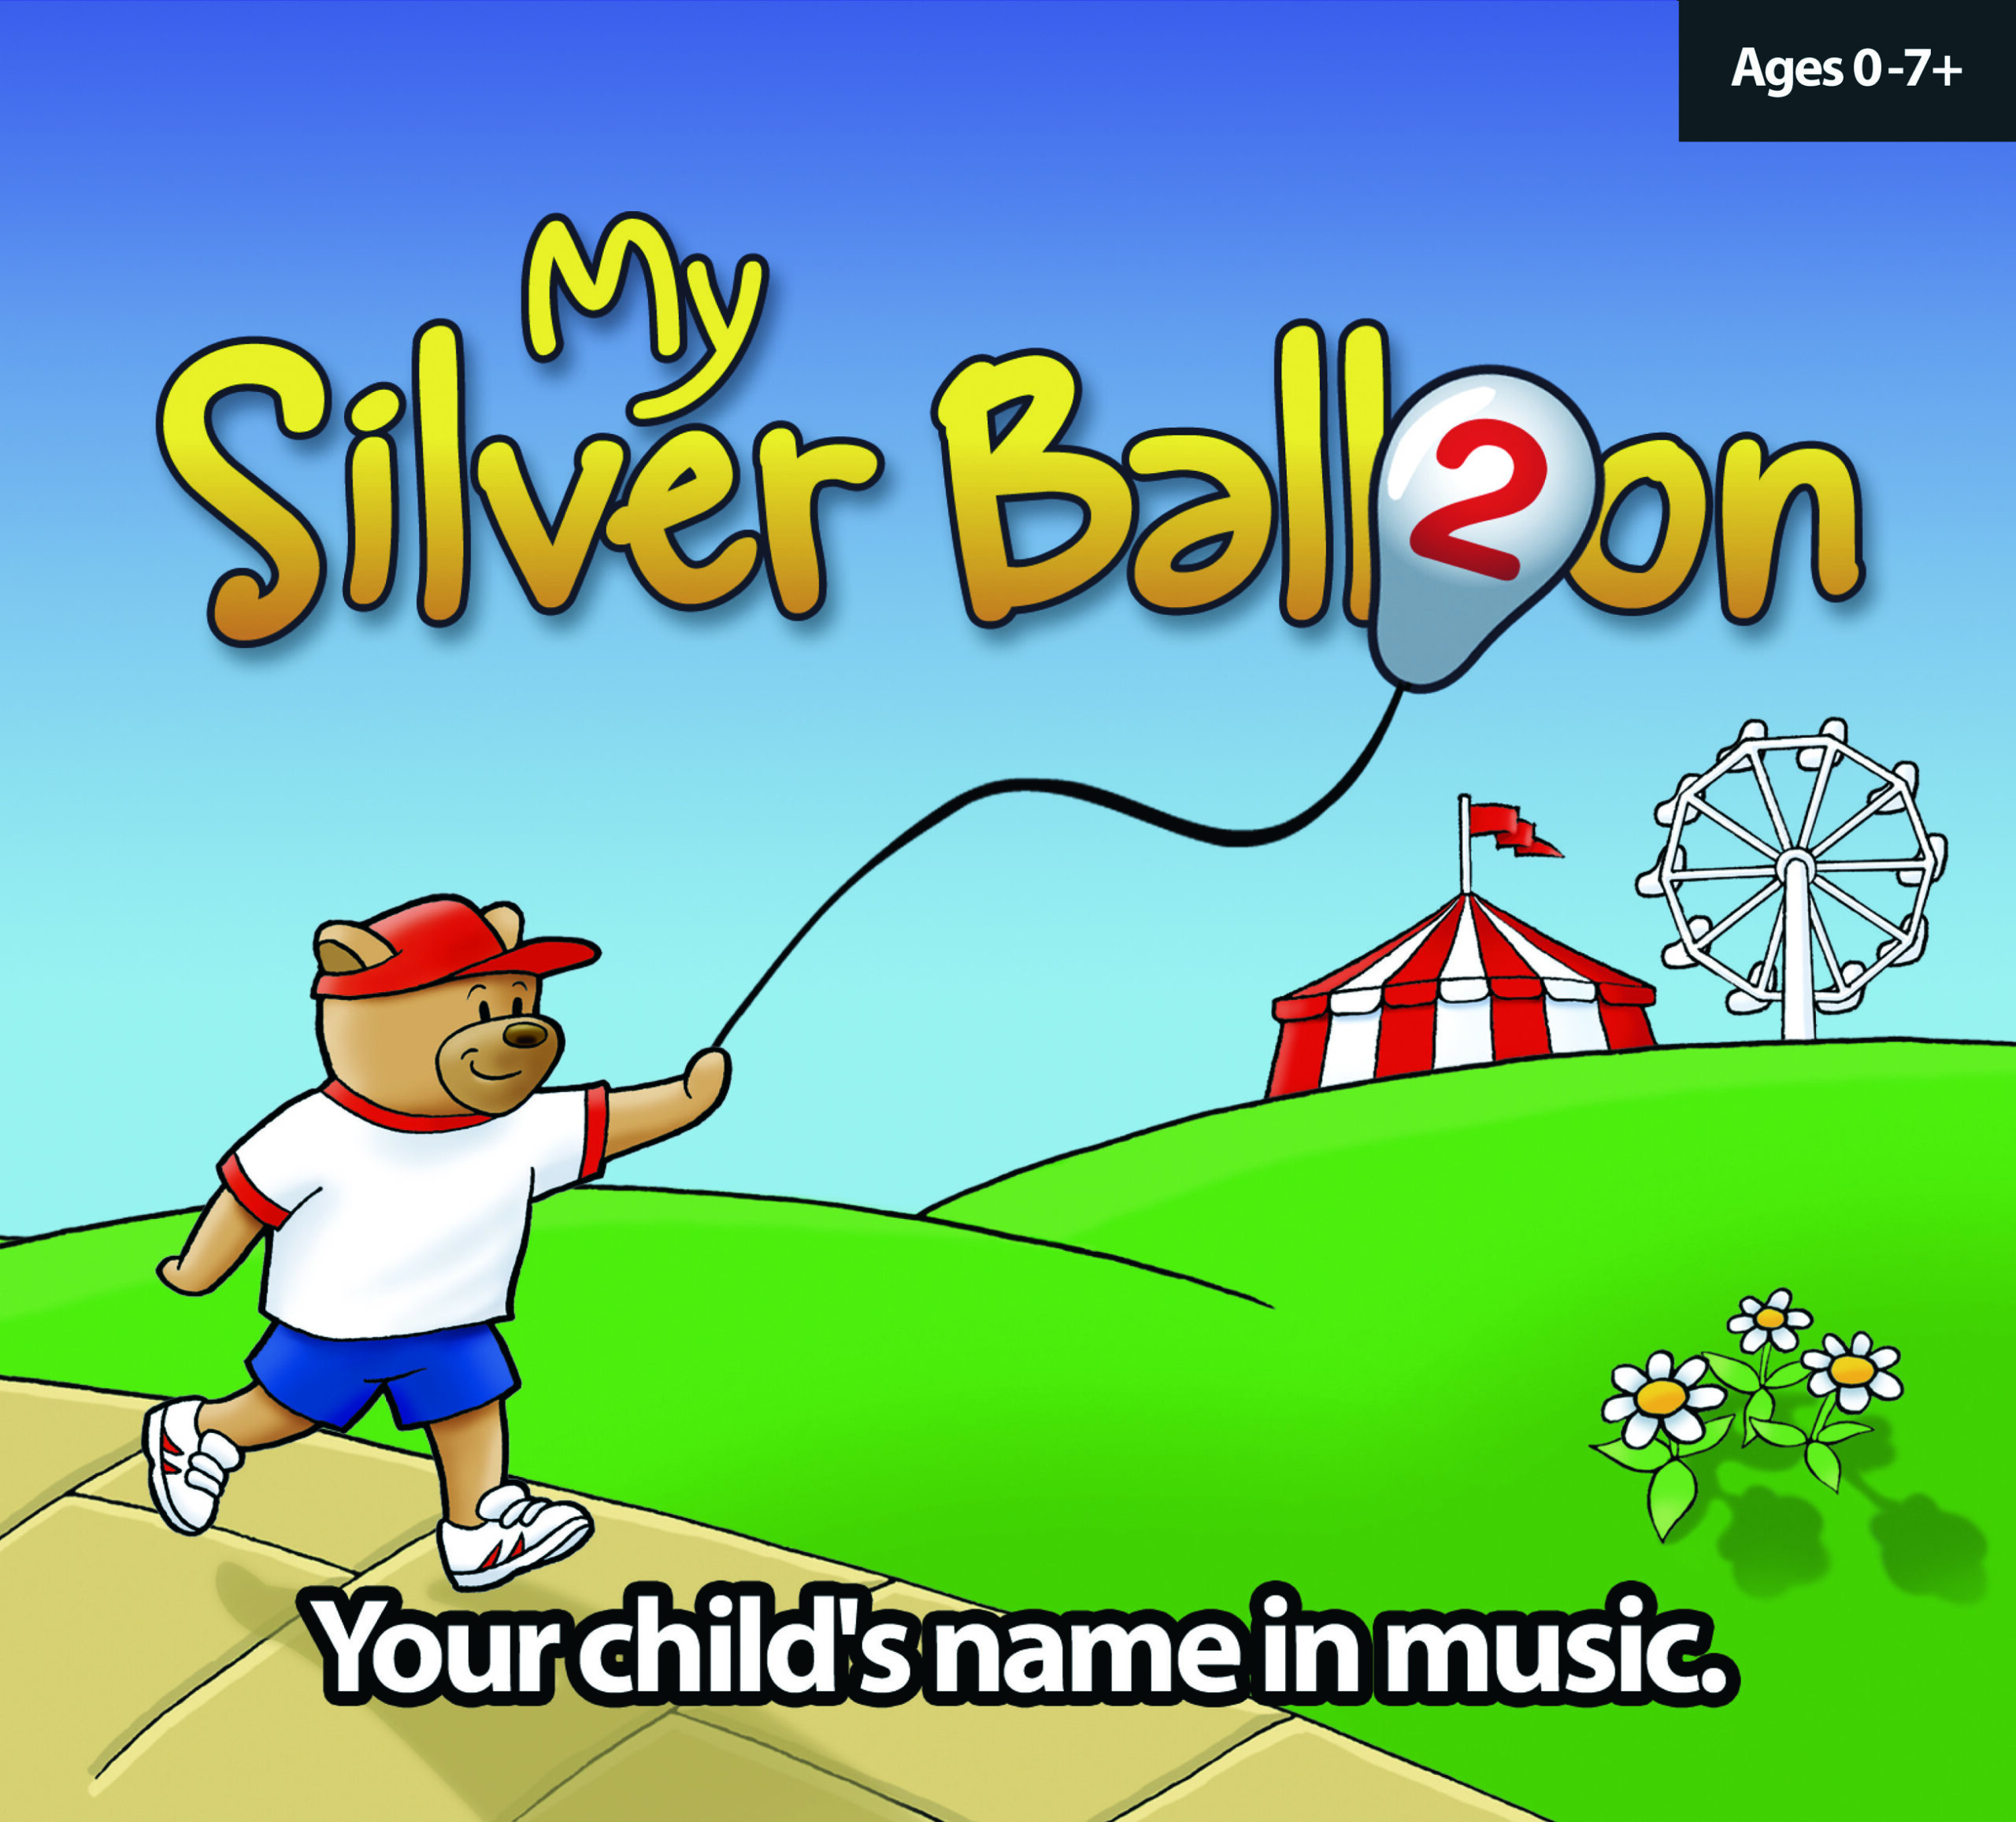 My Silver Balloon Personalised song cd with your name sung throughout